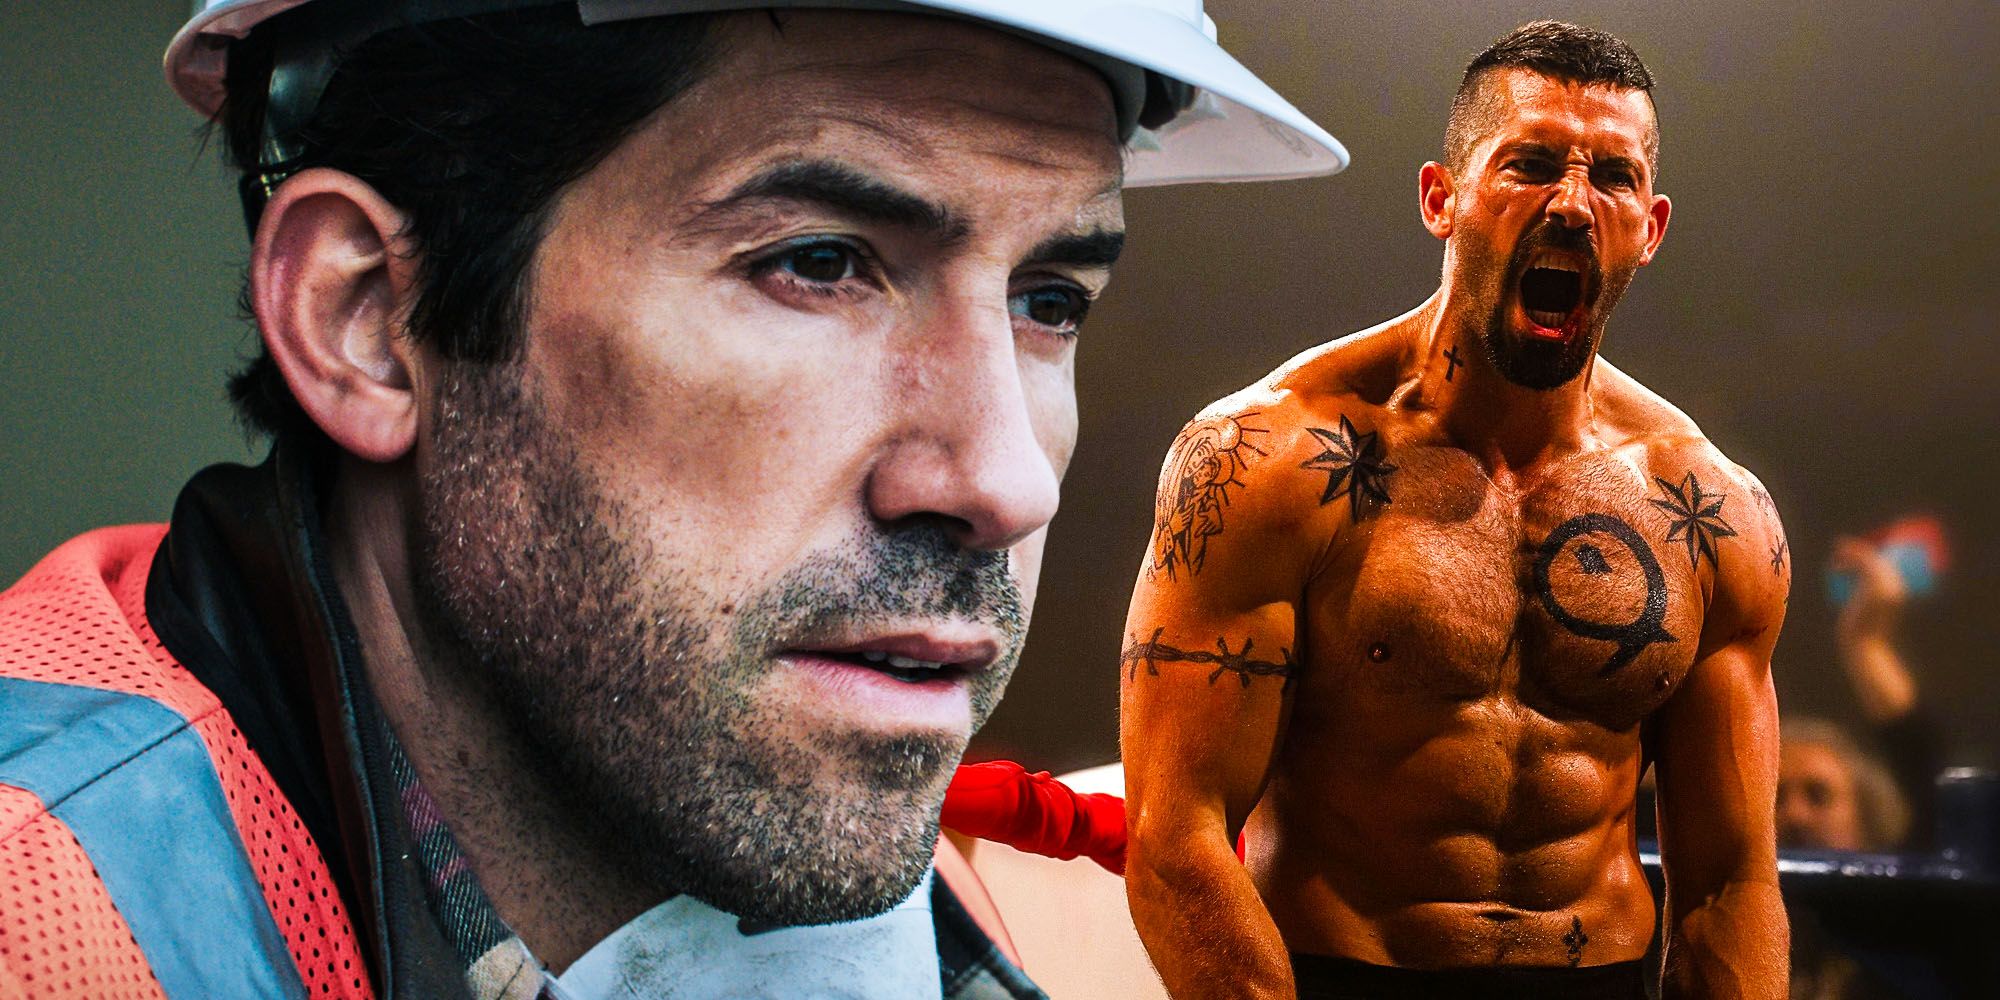 Castle falls easter egg to scott adkins most famous character yuri boyka undisputed